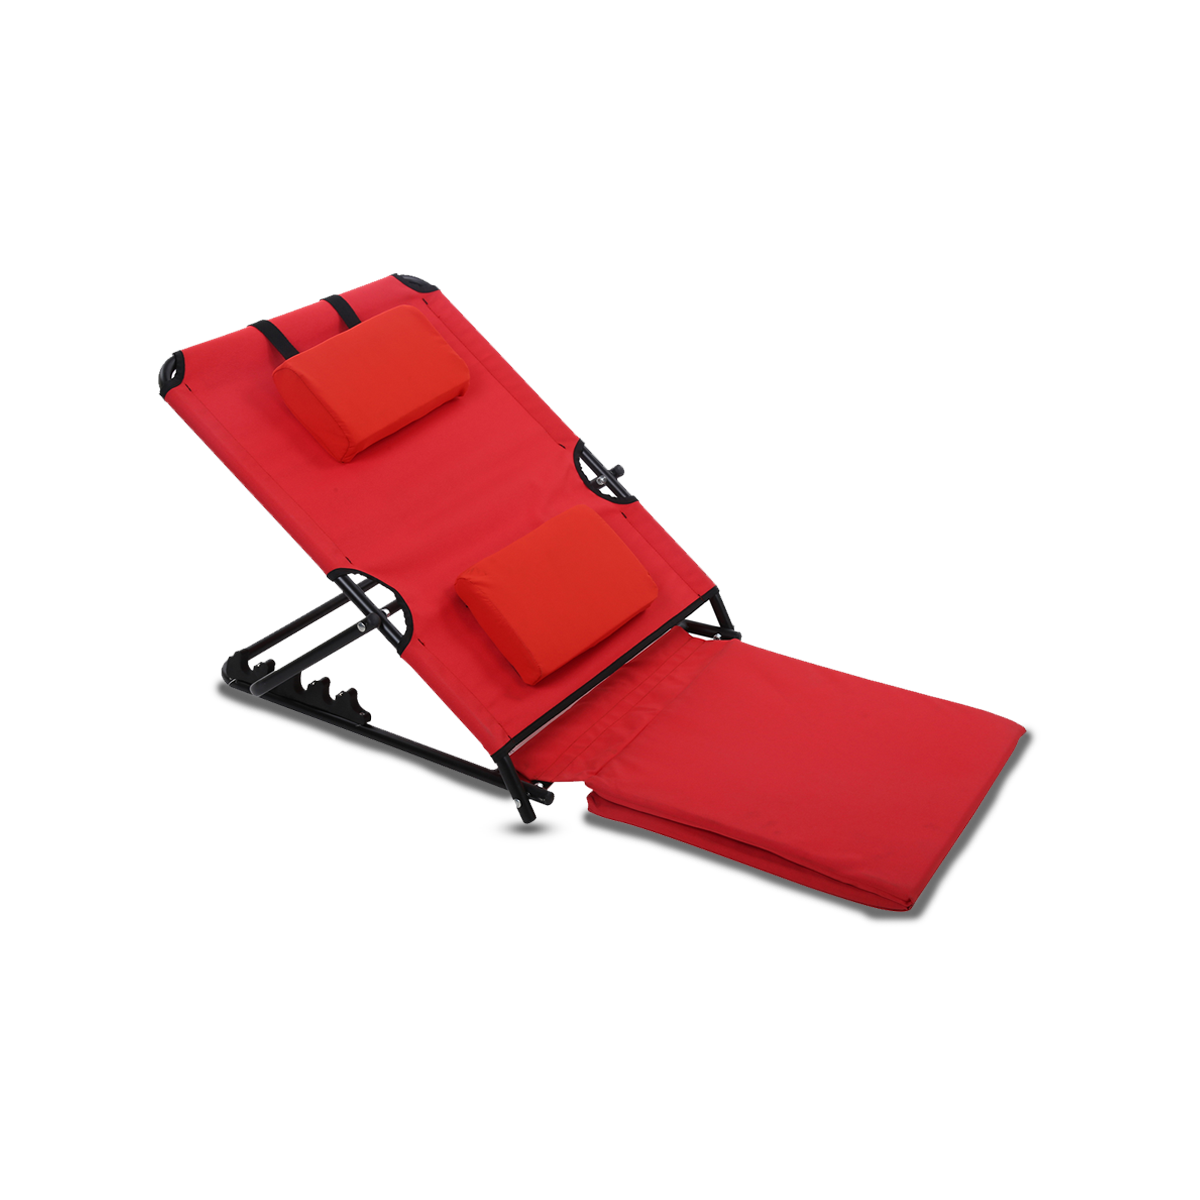 Adjustable Recliner Bed for Camping, Outing, Trekking